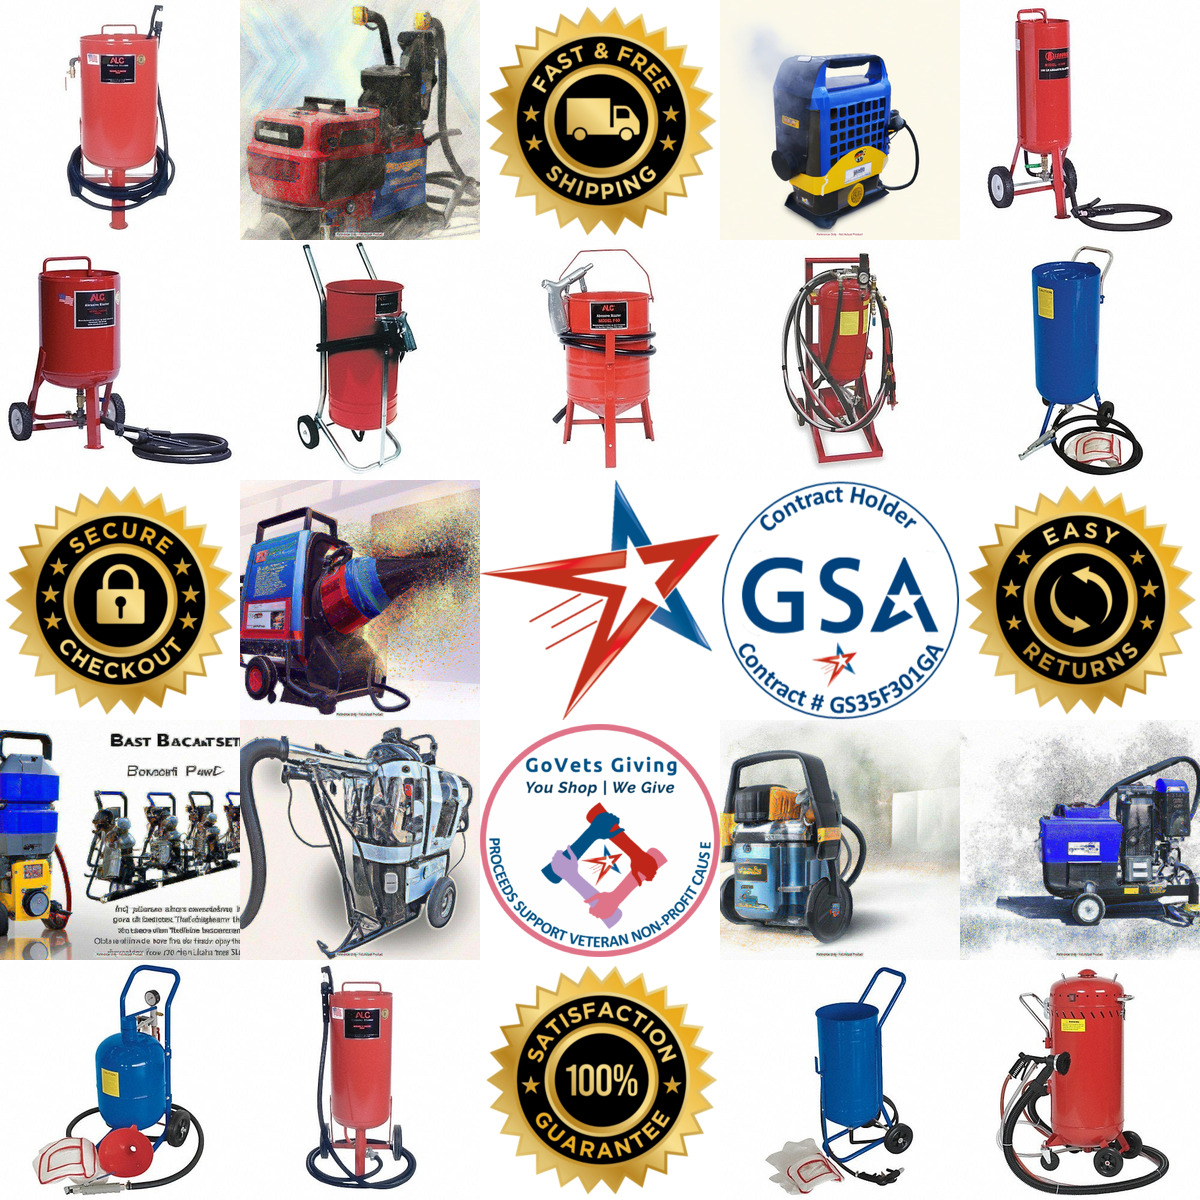 A selection of Portable Abrasive Blasters products on GoVets